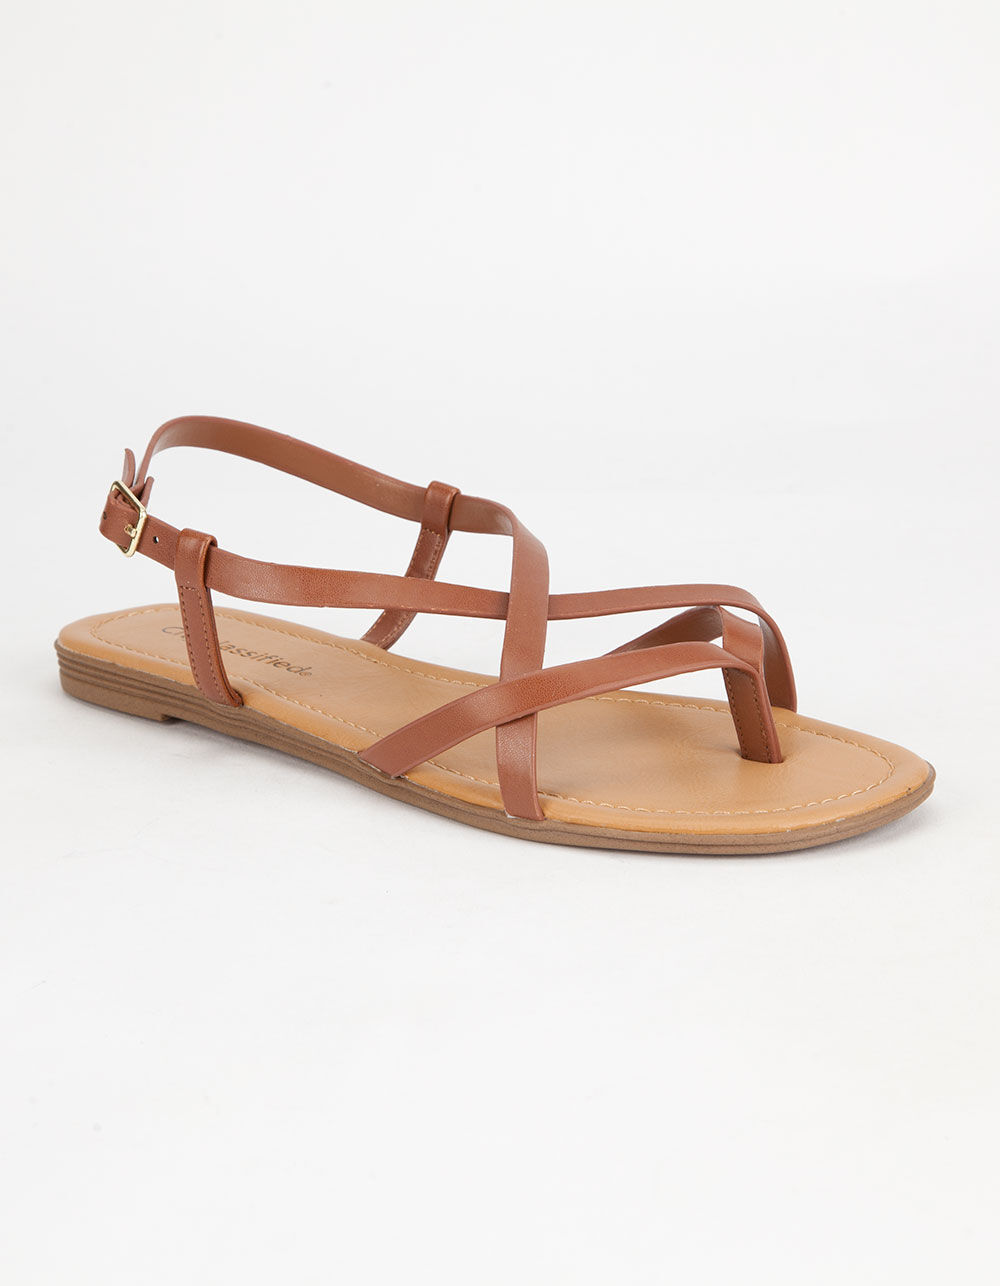 CITY CLASSIFIED SPICA SANDALS